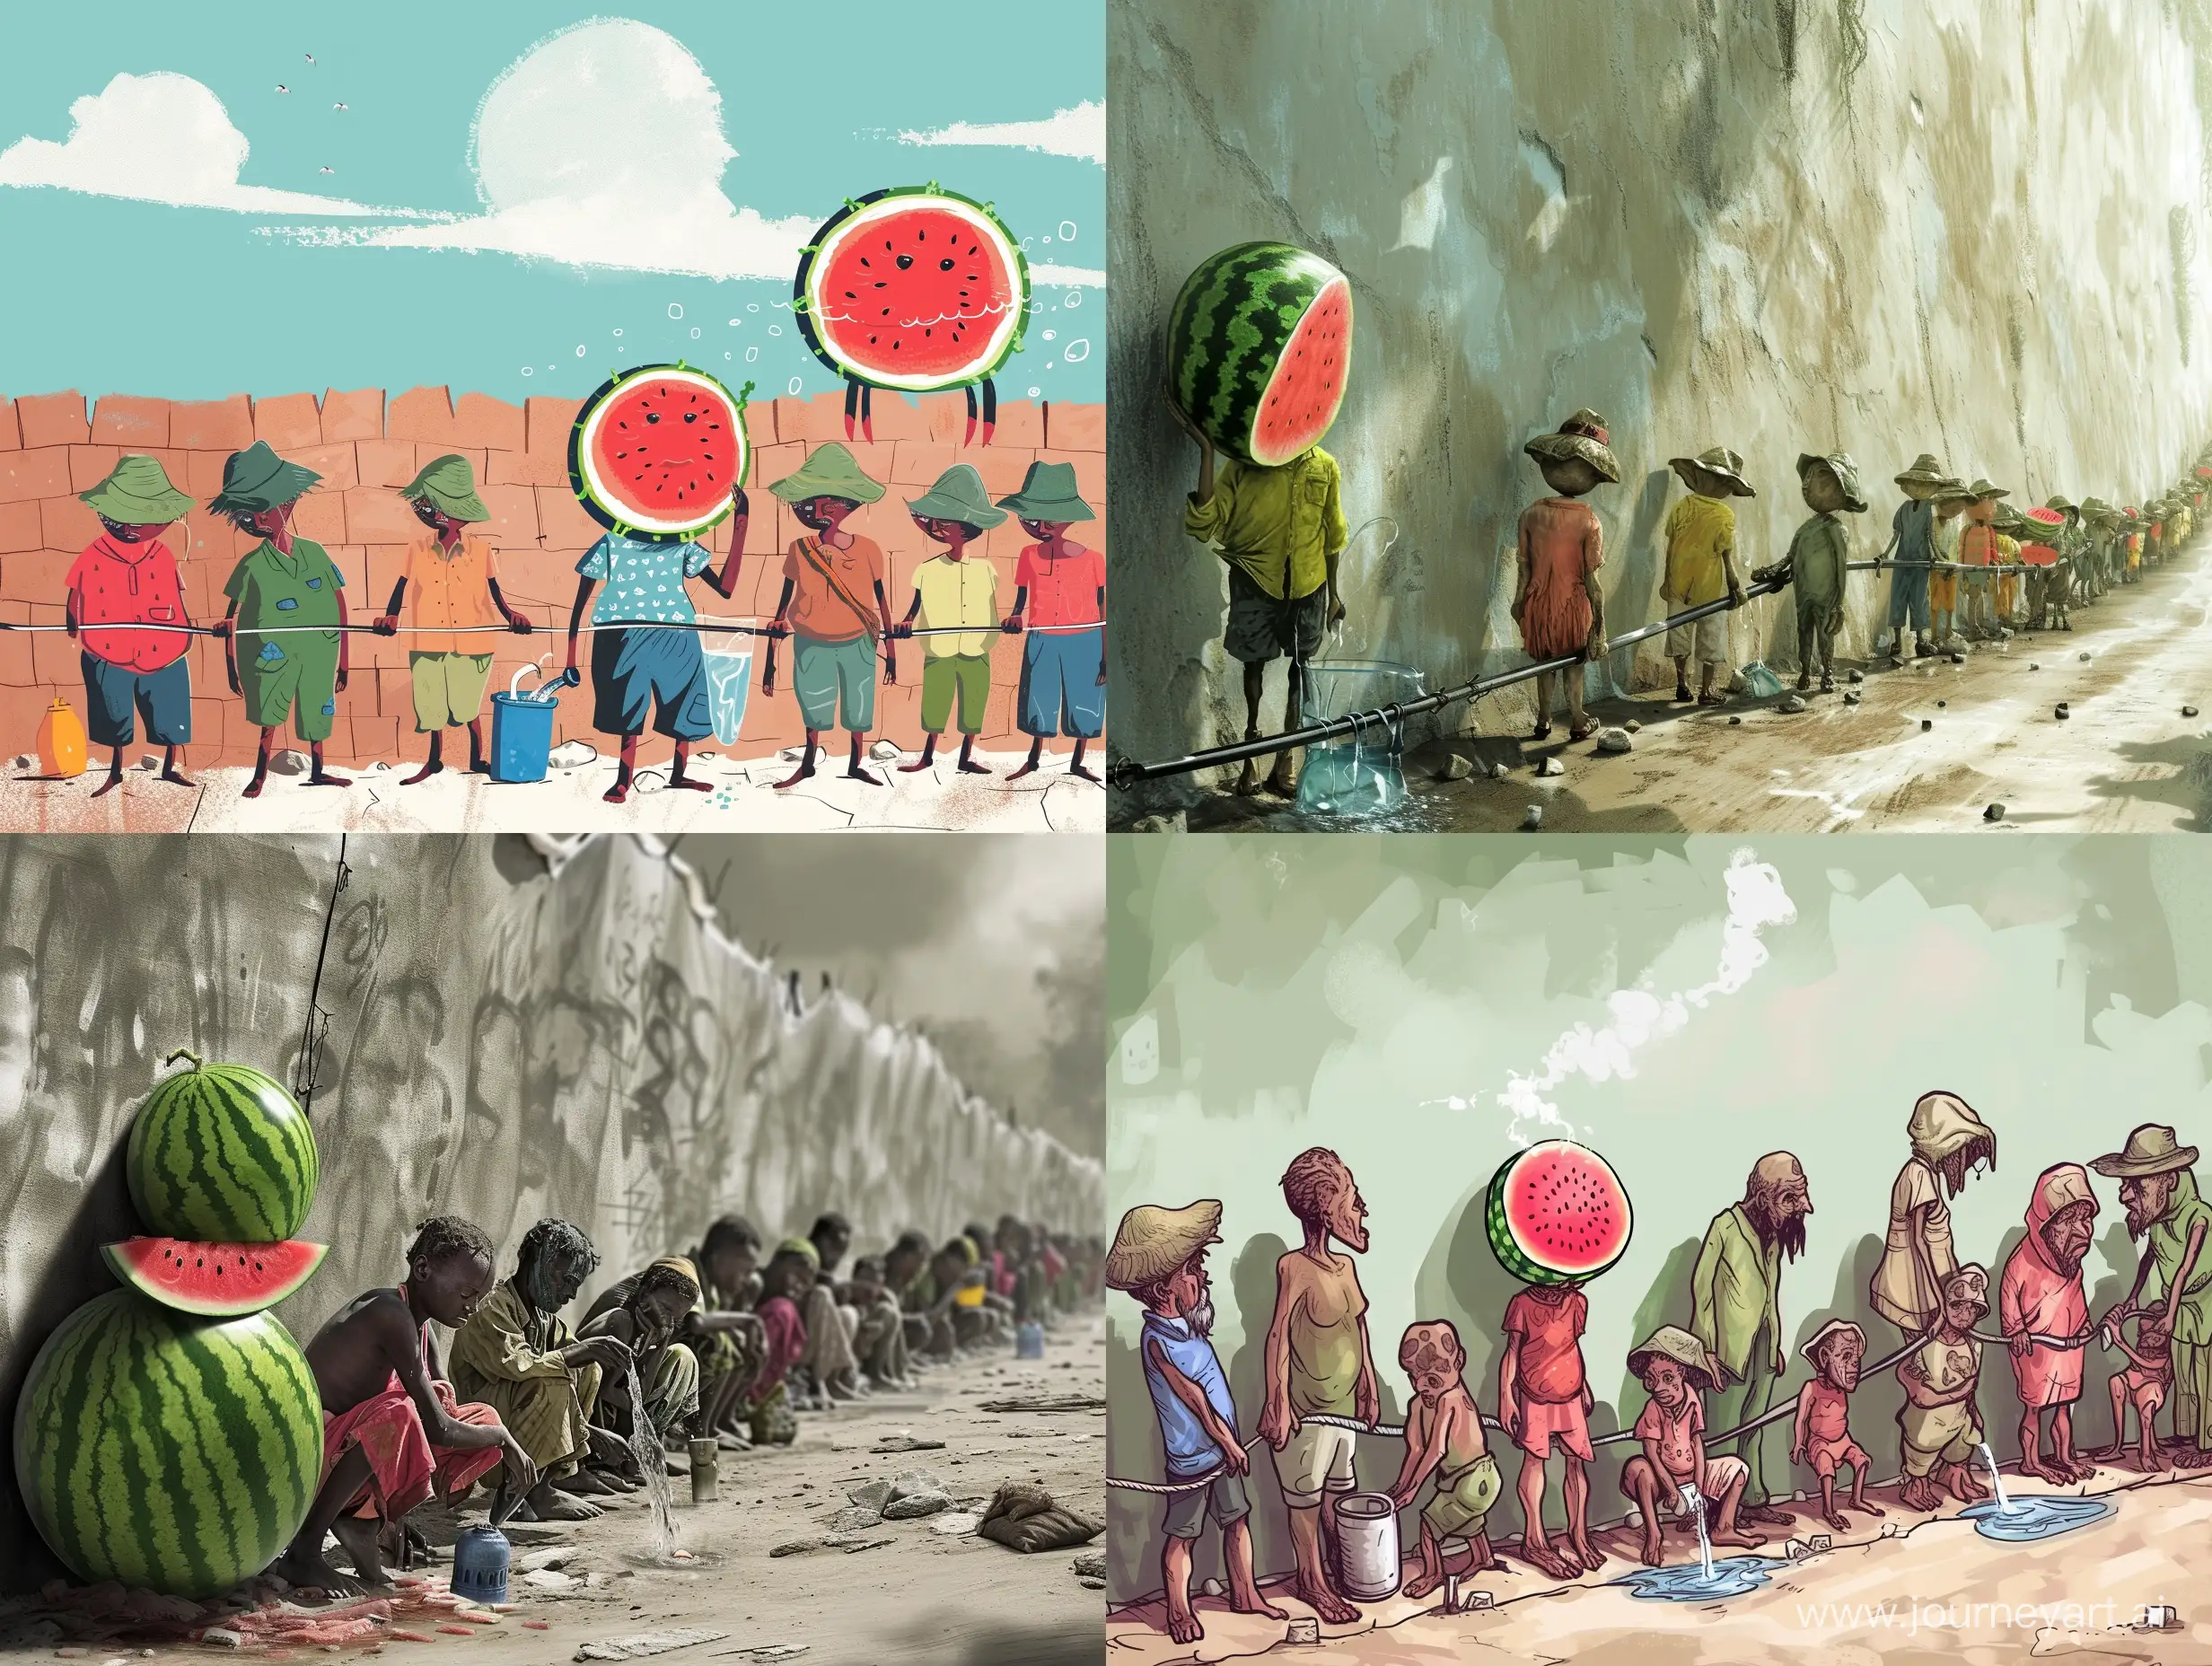 Poor People with watermelon head in a poverty line getting water